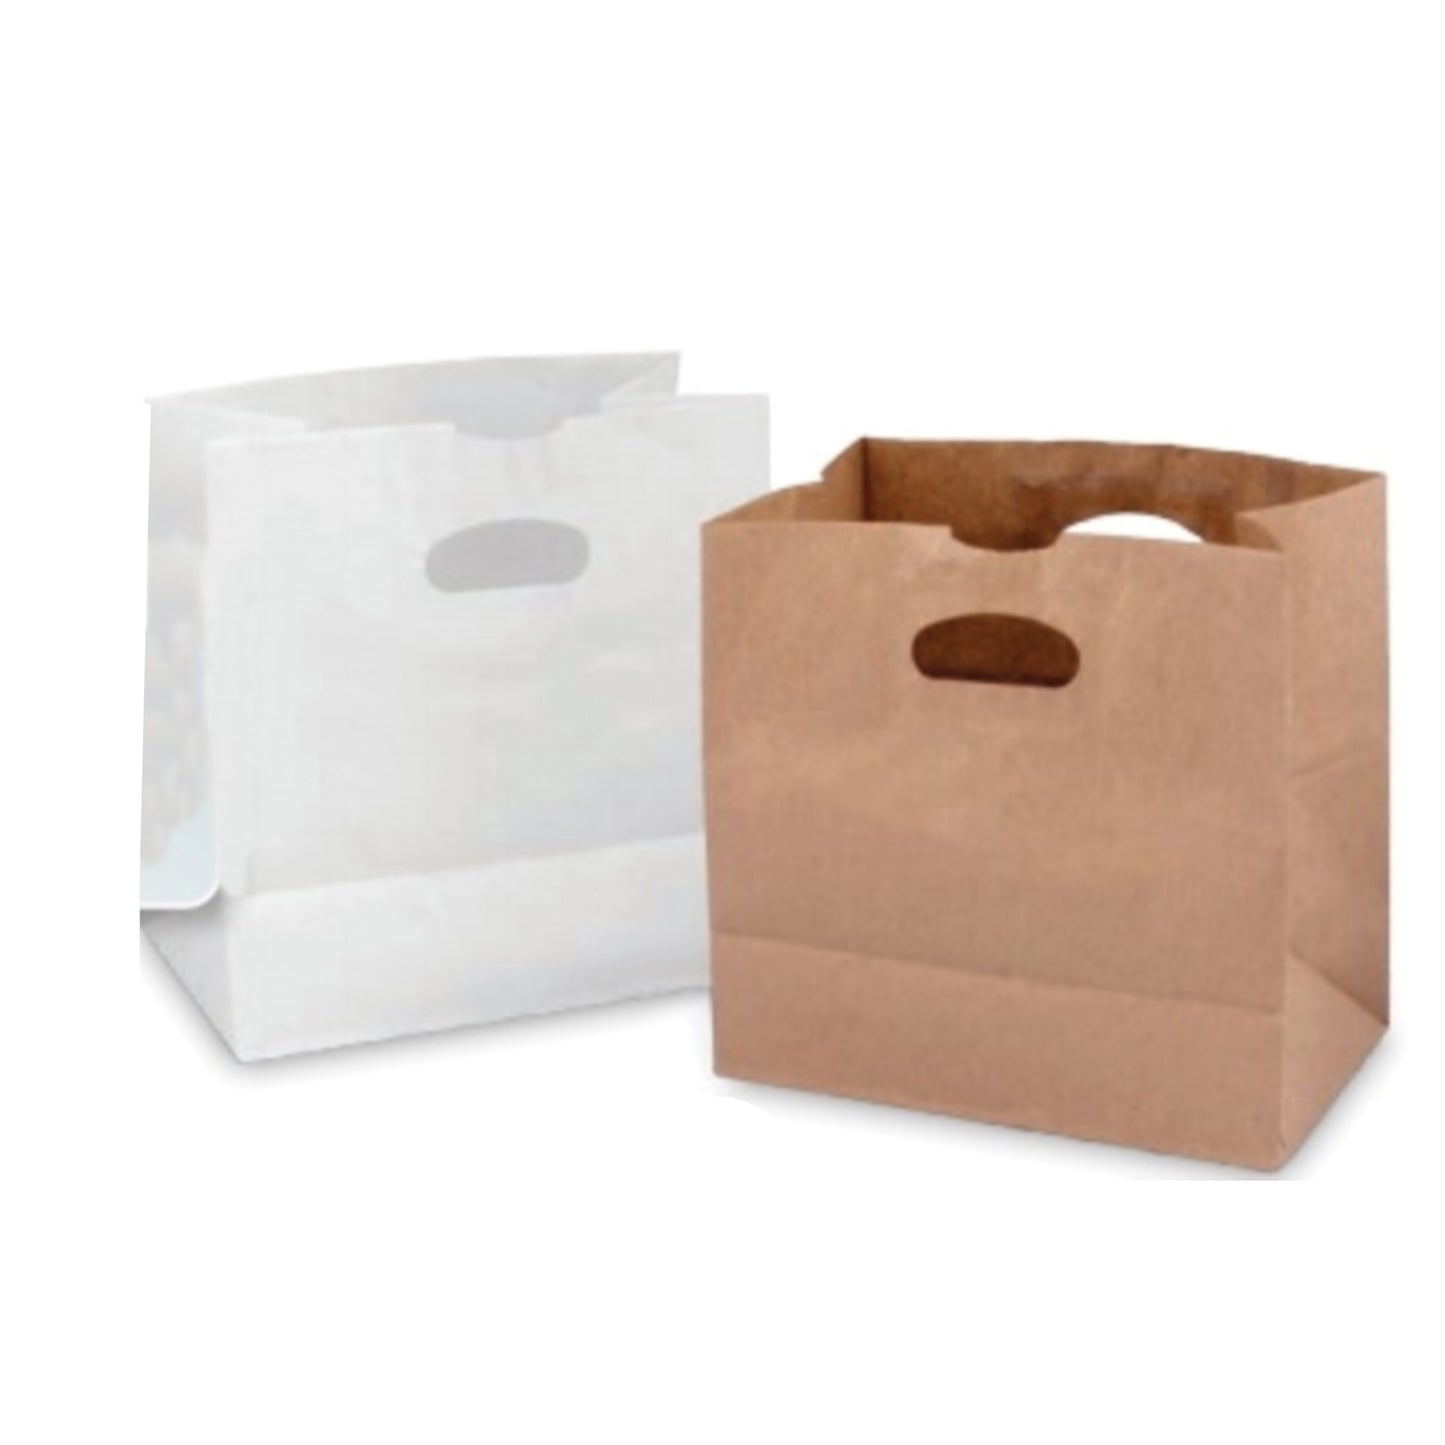 These FSC® and SFI®  certified heavy-duty, self opening 11in x 6in x 11in Dubl Life® 40# natural Kraft paper shopping bags feature a die-cut handle with built-in locking system and a large rectangular flat bottom. Sold 500 per bundle.